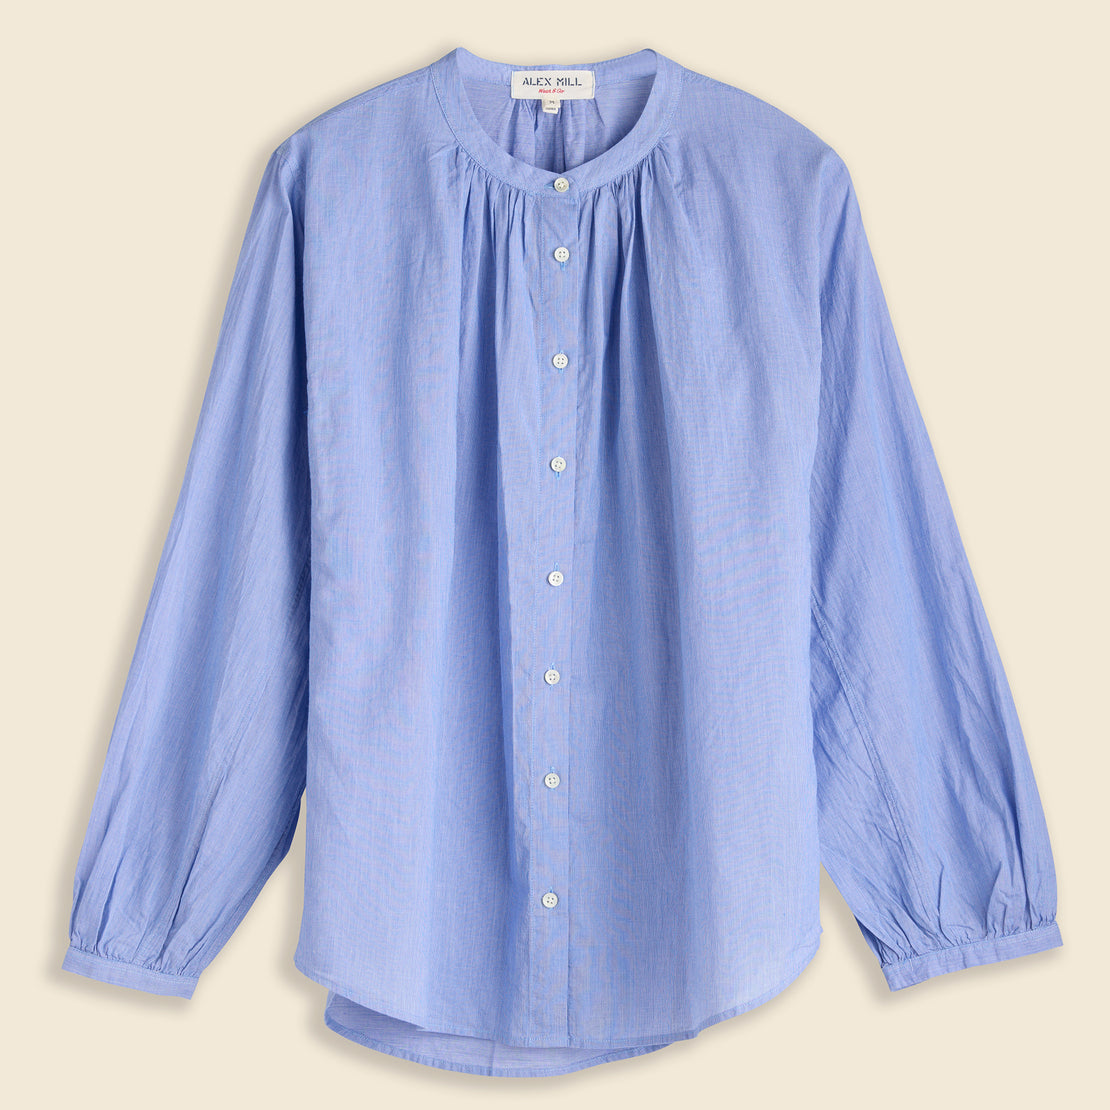 Alex Mill Katherine Shirt in End on End - Blue